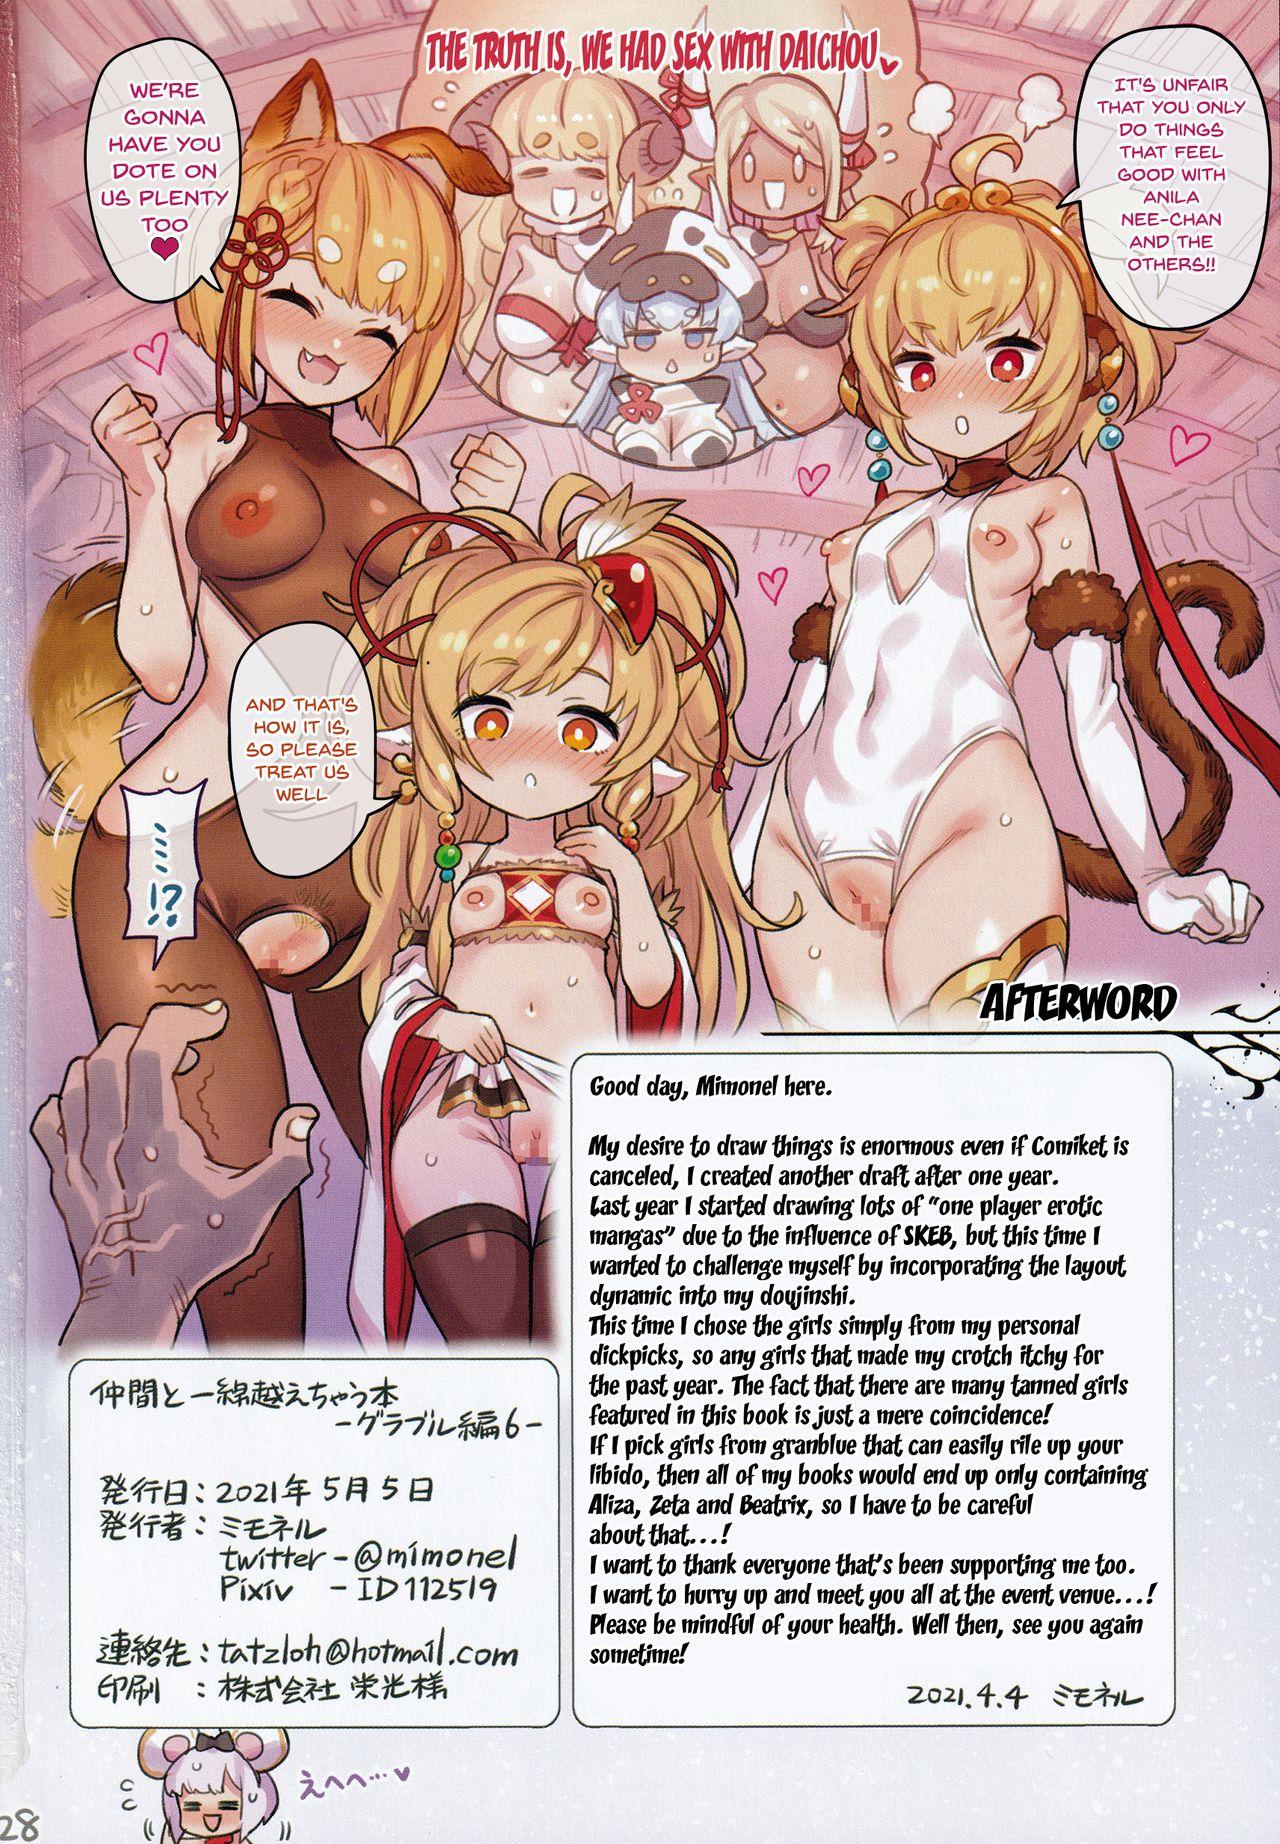 Stepbrother (AC3) [Mimoneland (Mimonel)] Nakama to Issen Koechau Hon -Grablu Hen 6- | A Book About Crossing The Line With Your Friends ~GranBlue Book 6~ (Granblue Fantasy) [English] {Doujins.com} - Granblue fantasy Nigeria - Page 26